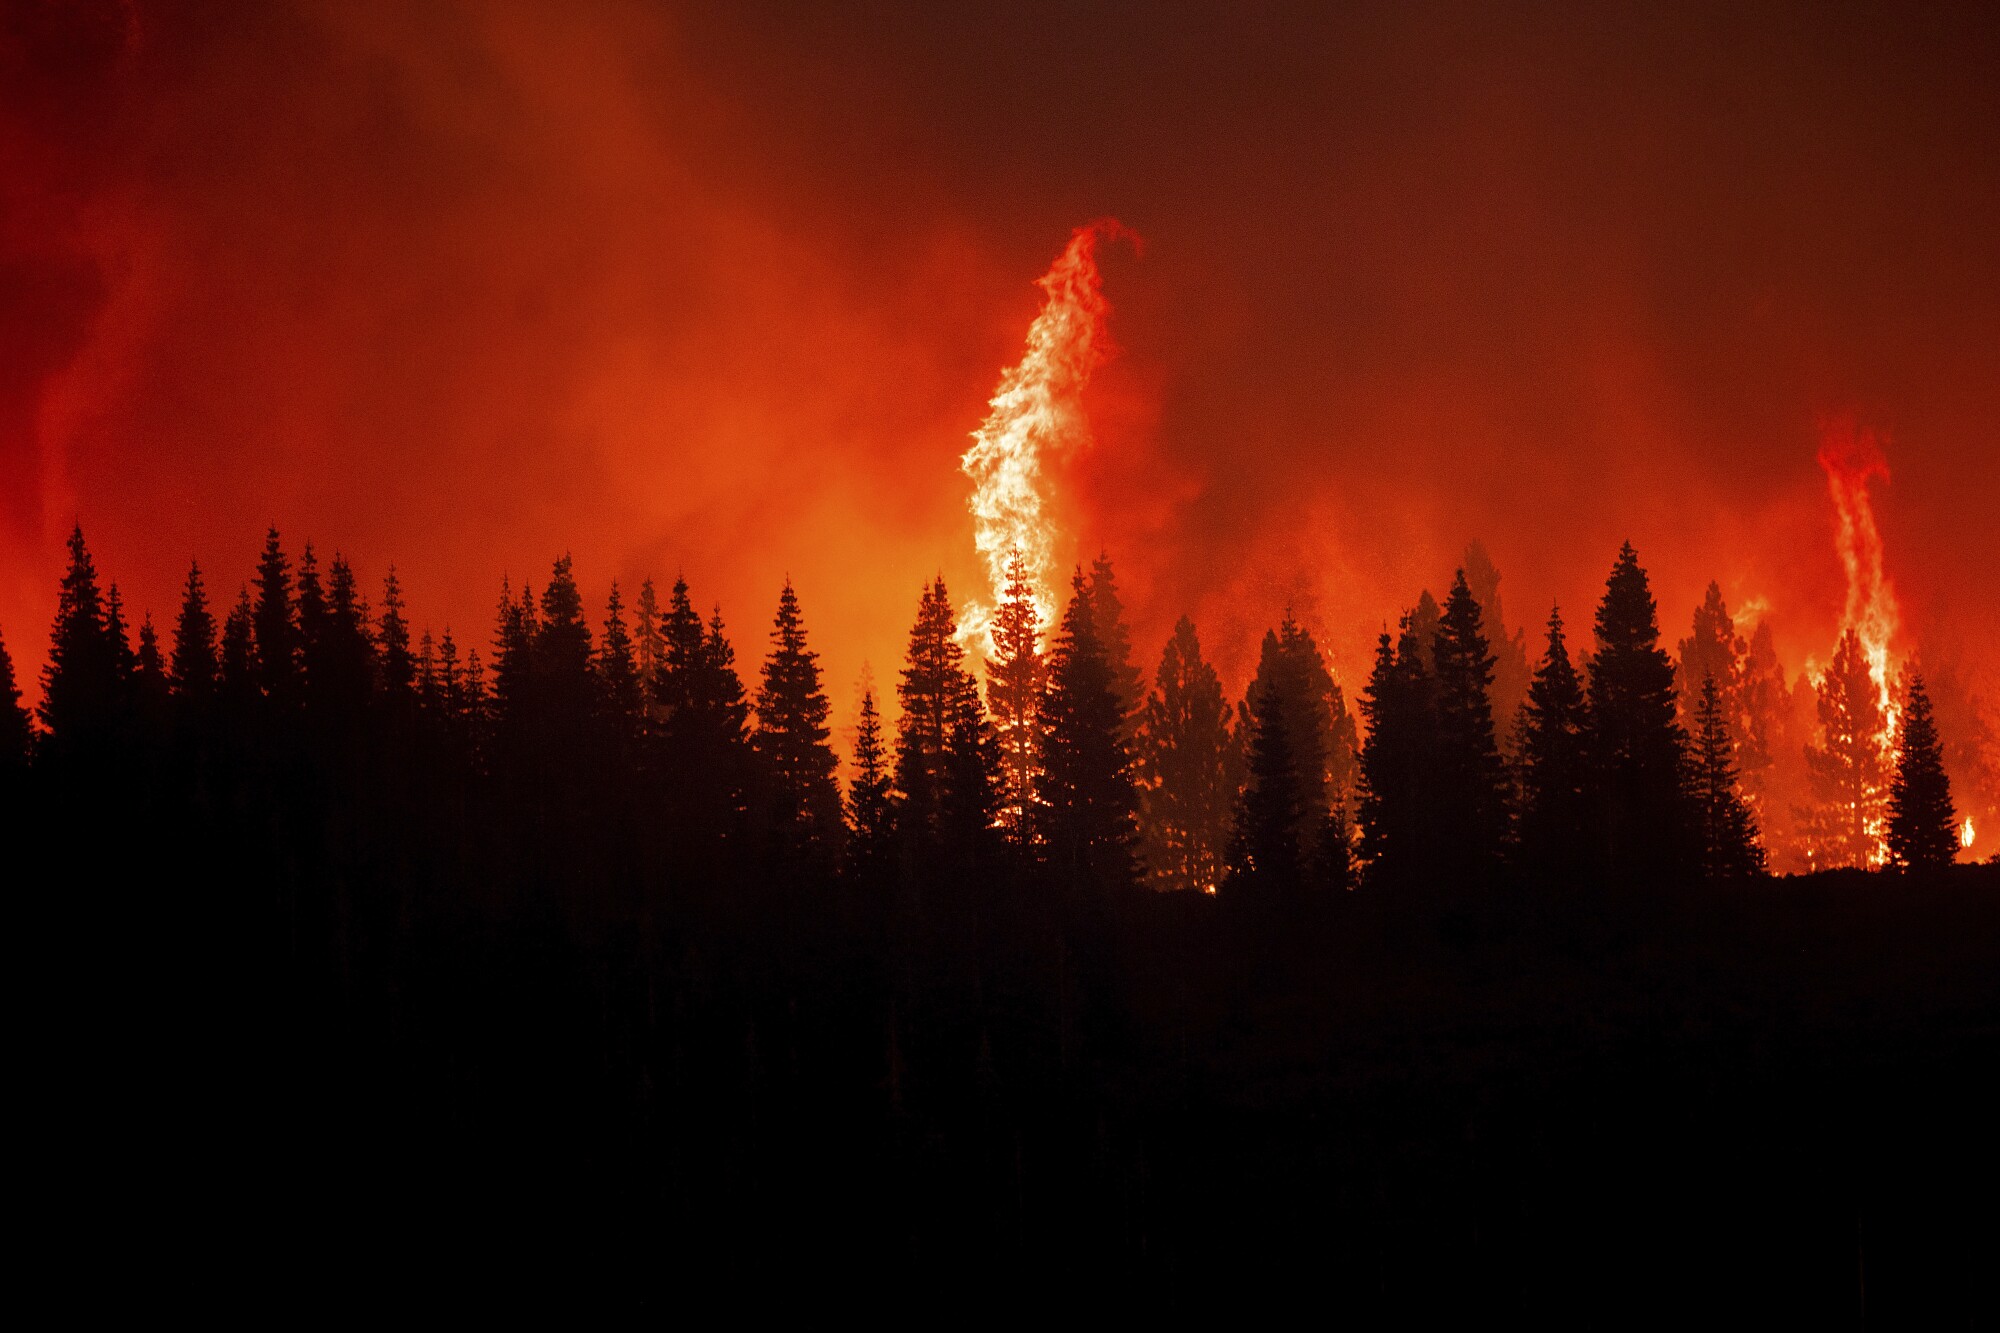 Flames from the Dixie fire crest a hill in Lassen National Forest